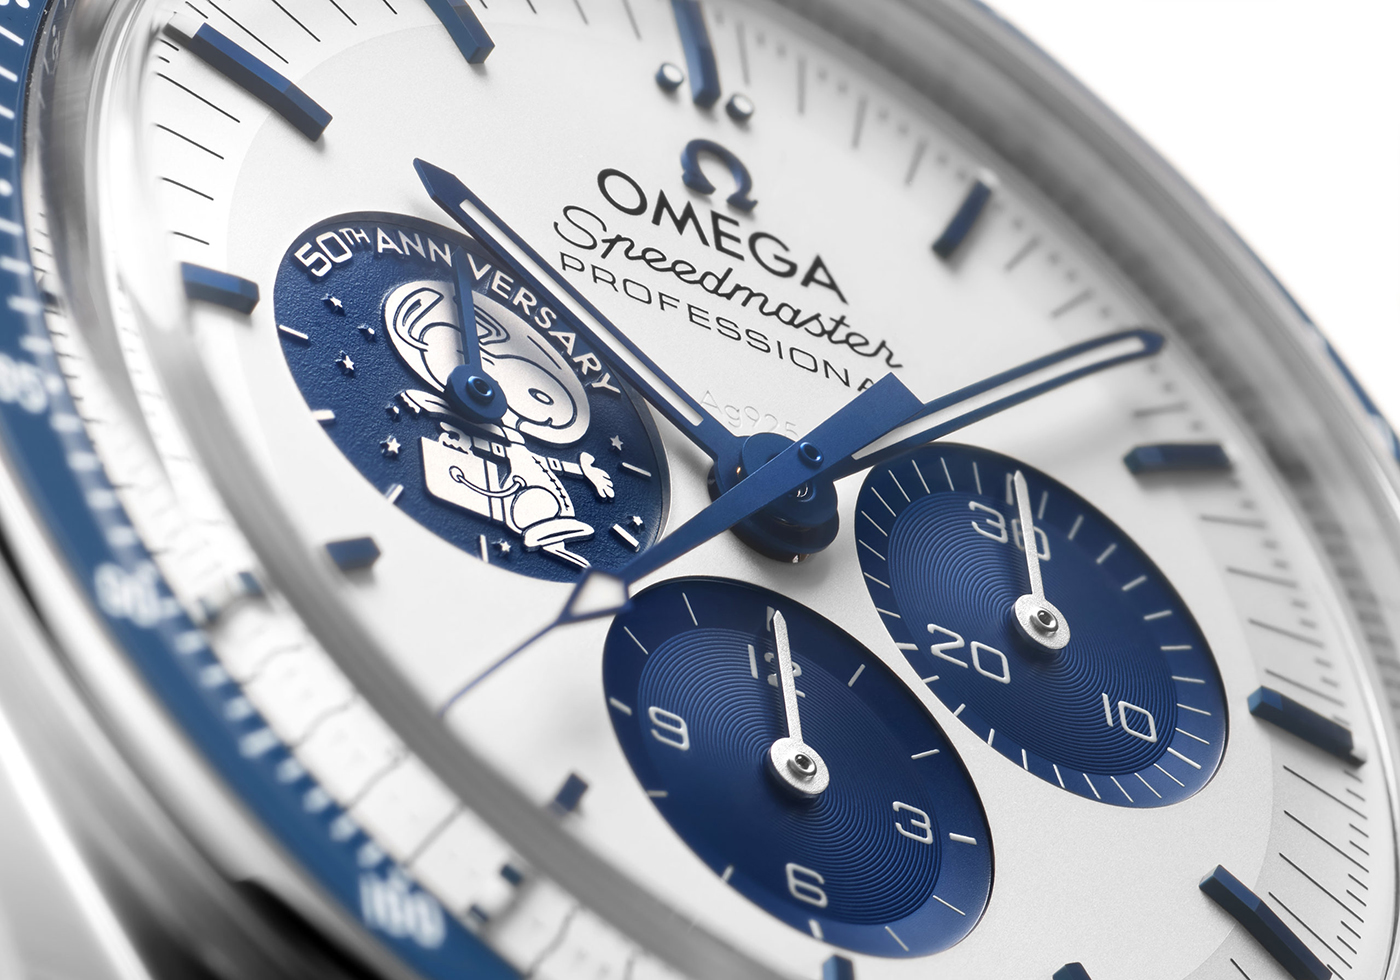 Omega Celebrates The Silver Snoopy Award's 50th Anniversary With New Speedmaster Moonwatch Watch Releases 